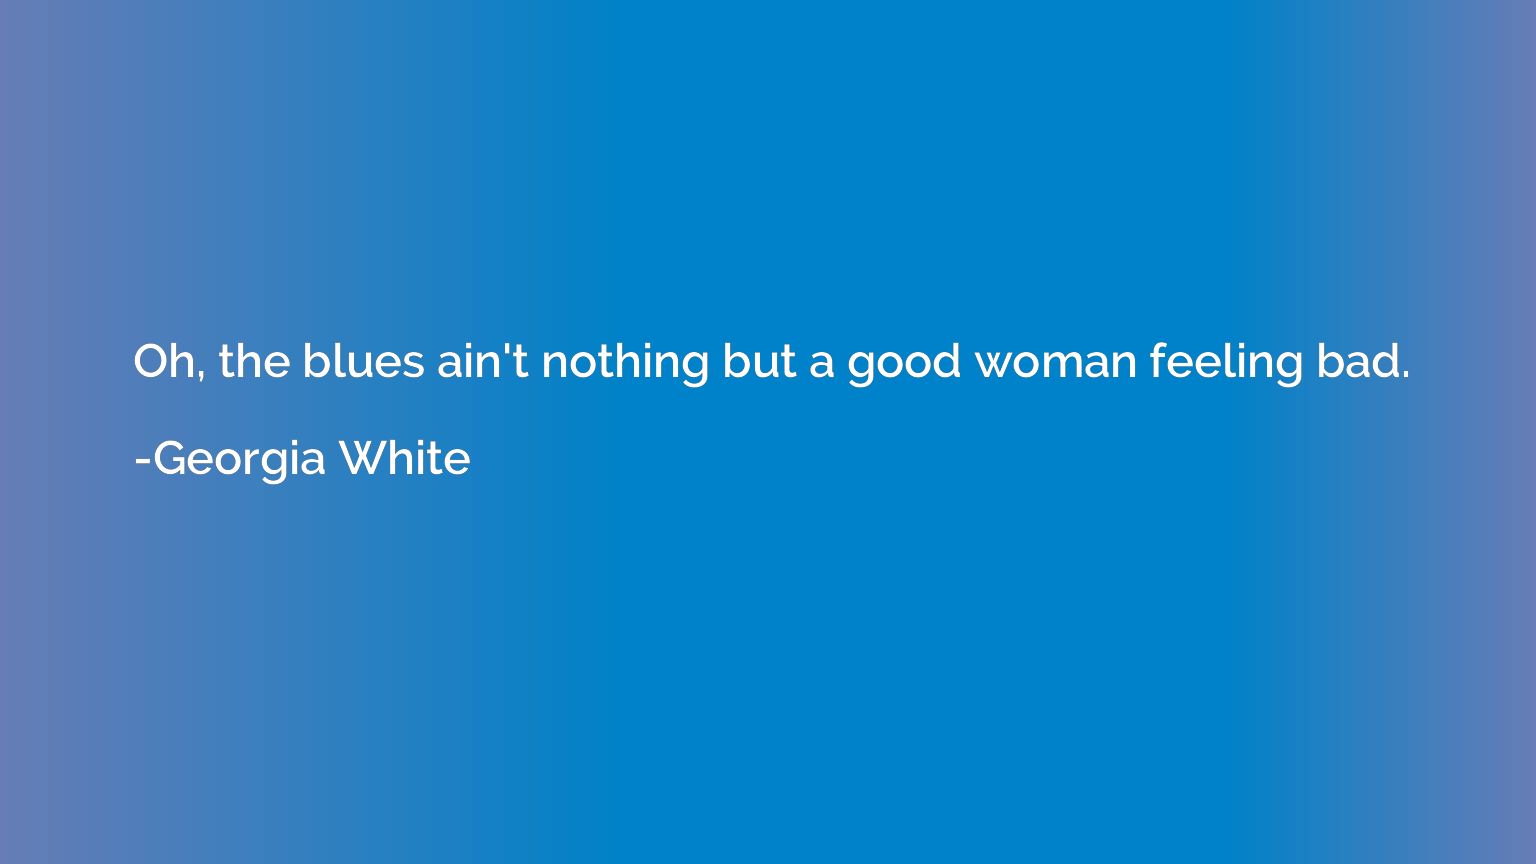 Oh, the blues ain't nothing but a good woman feeling bad.